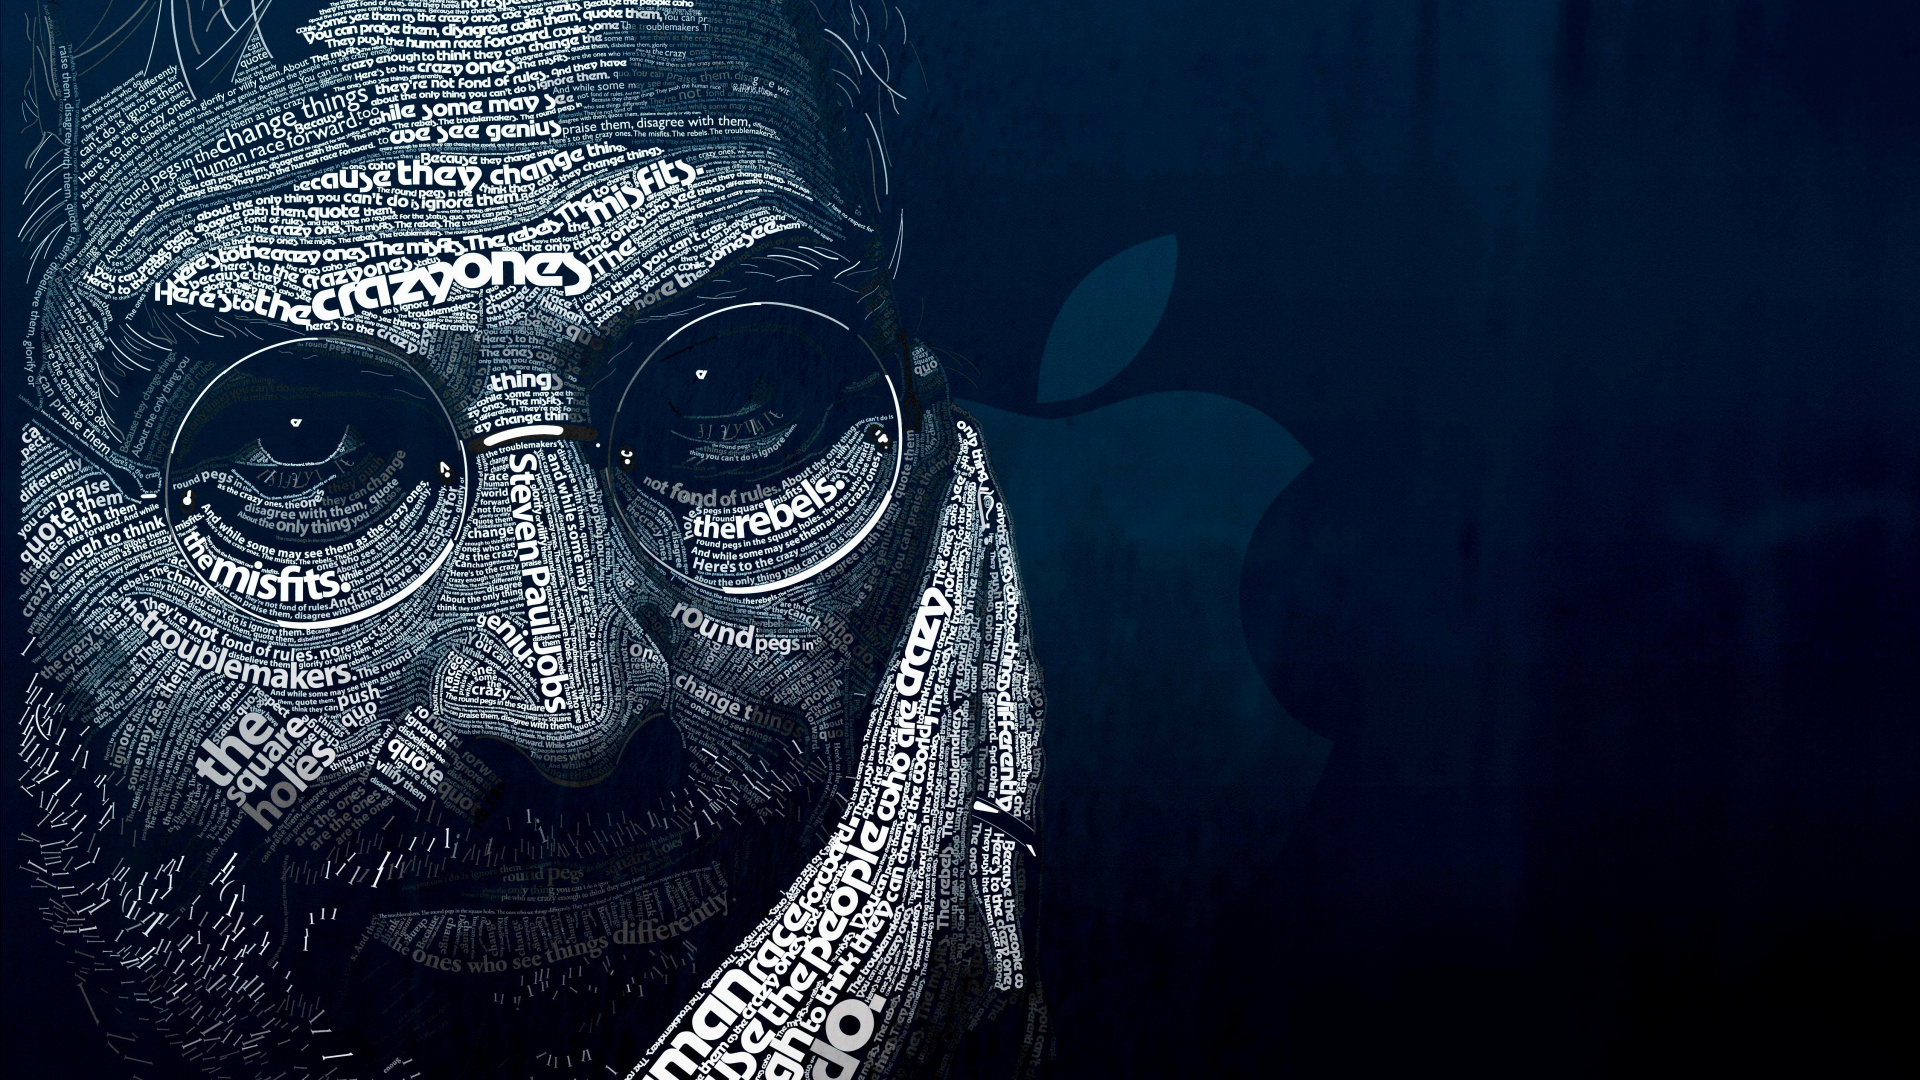 Steve Jobs, Obscurité, IPod, Masque, L'homme. Wallpaper in 1920x1080 Resolution